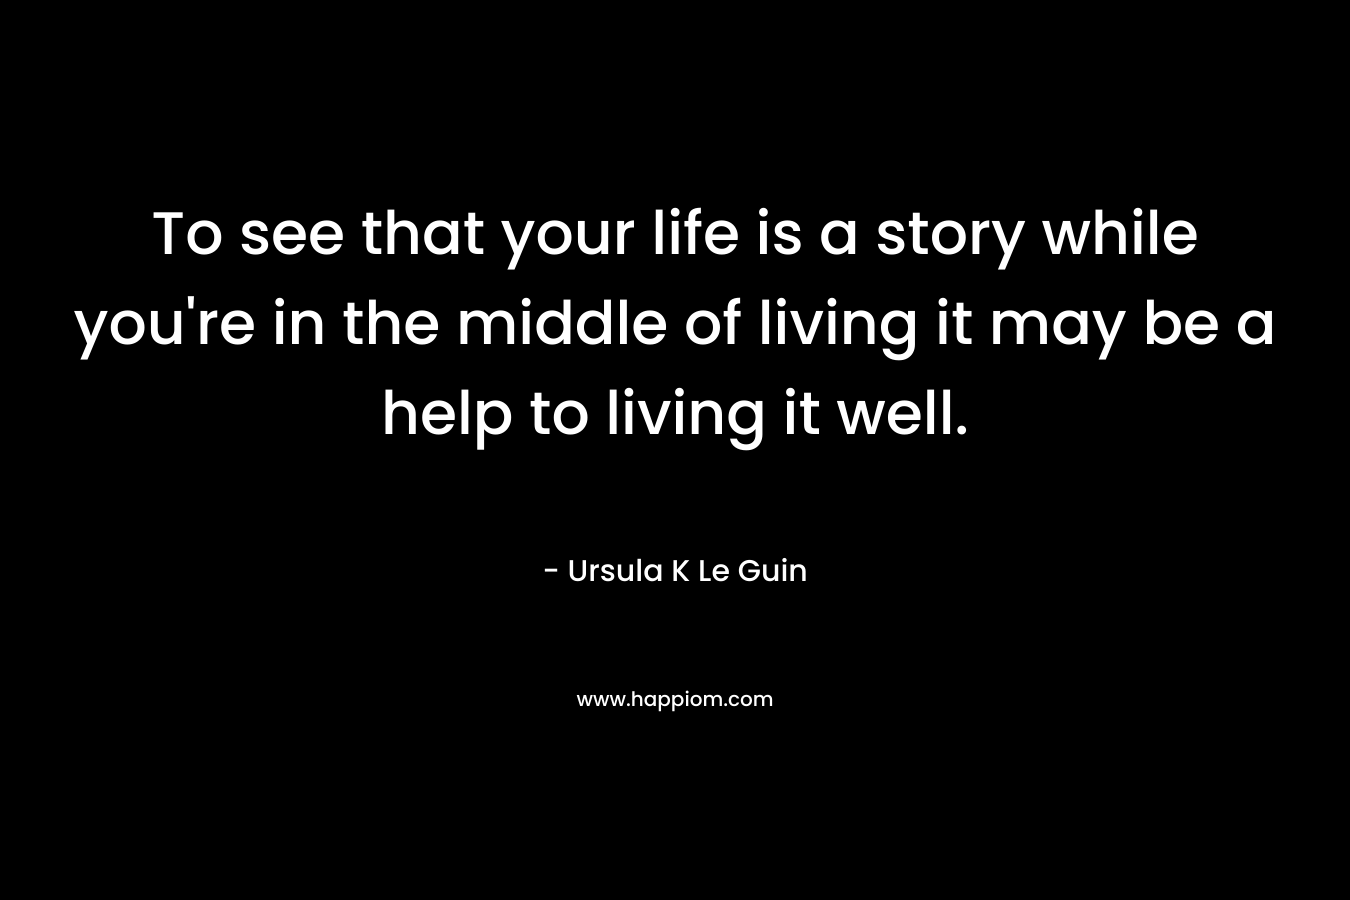 To see that your life is a story while you're in the middle of living it may be a help to living it well.